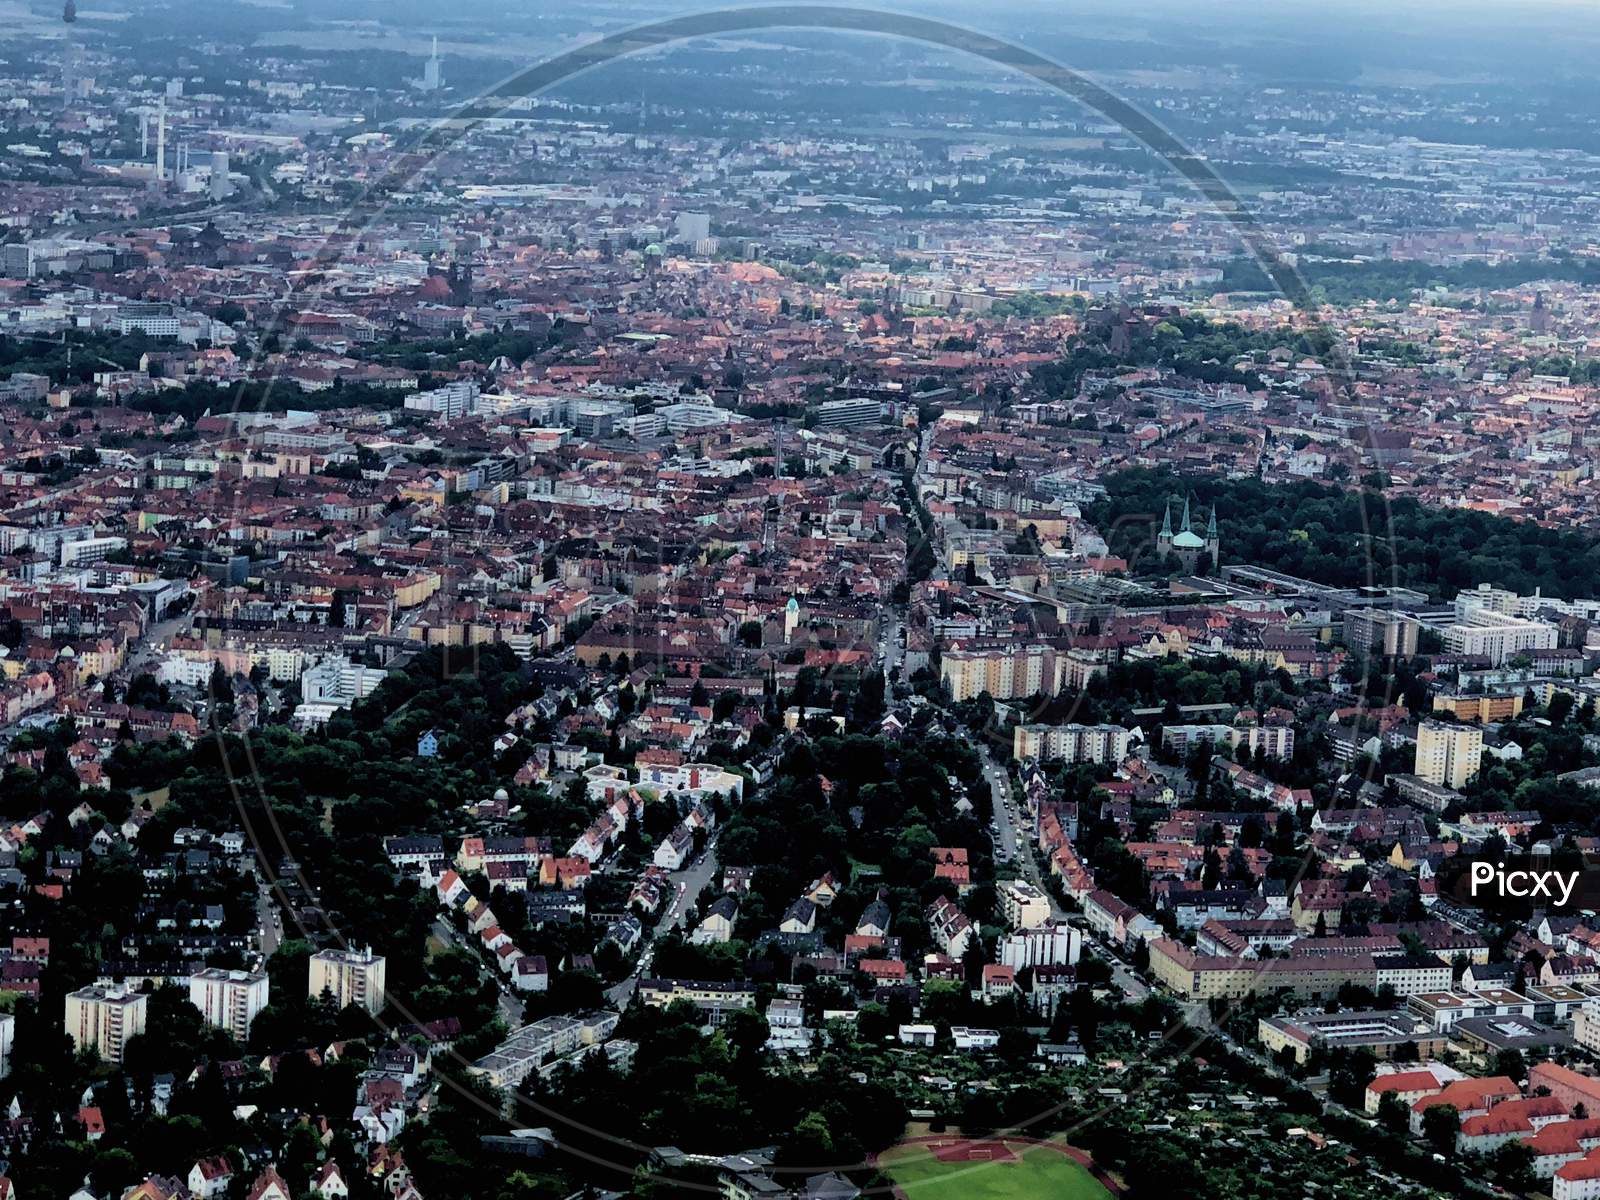 Nuremberg in Germany seen from above 27.7.2018